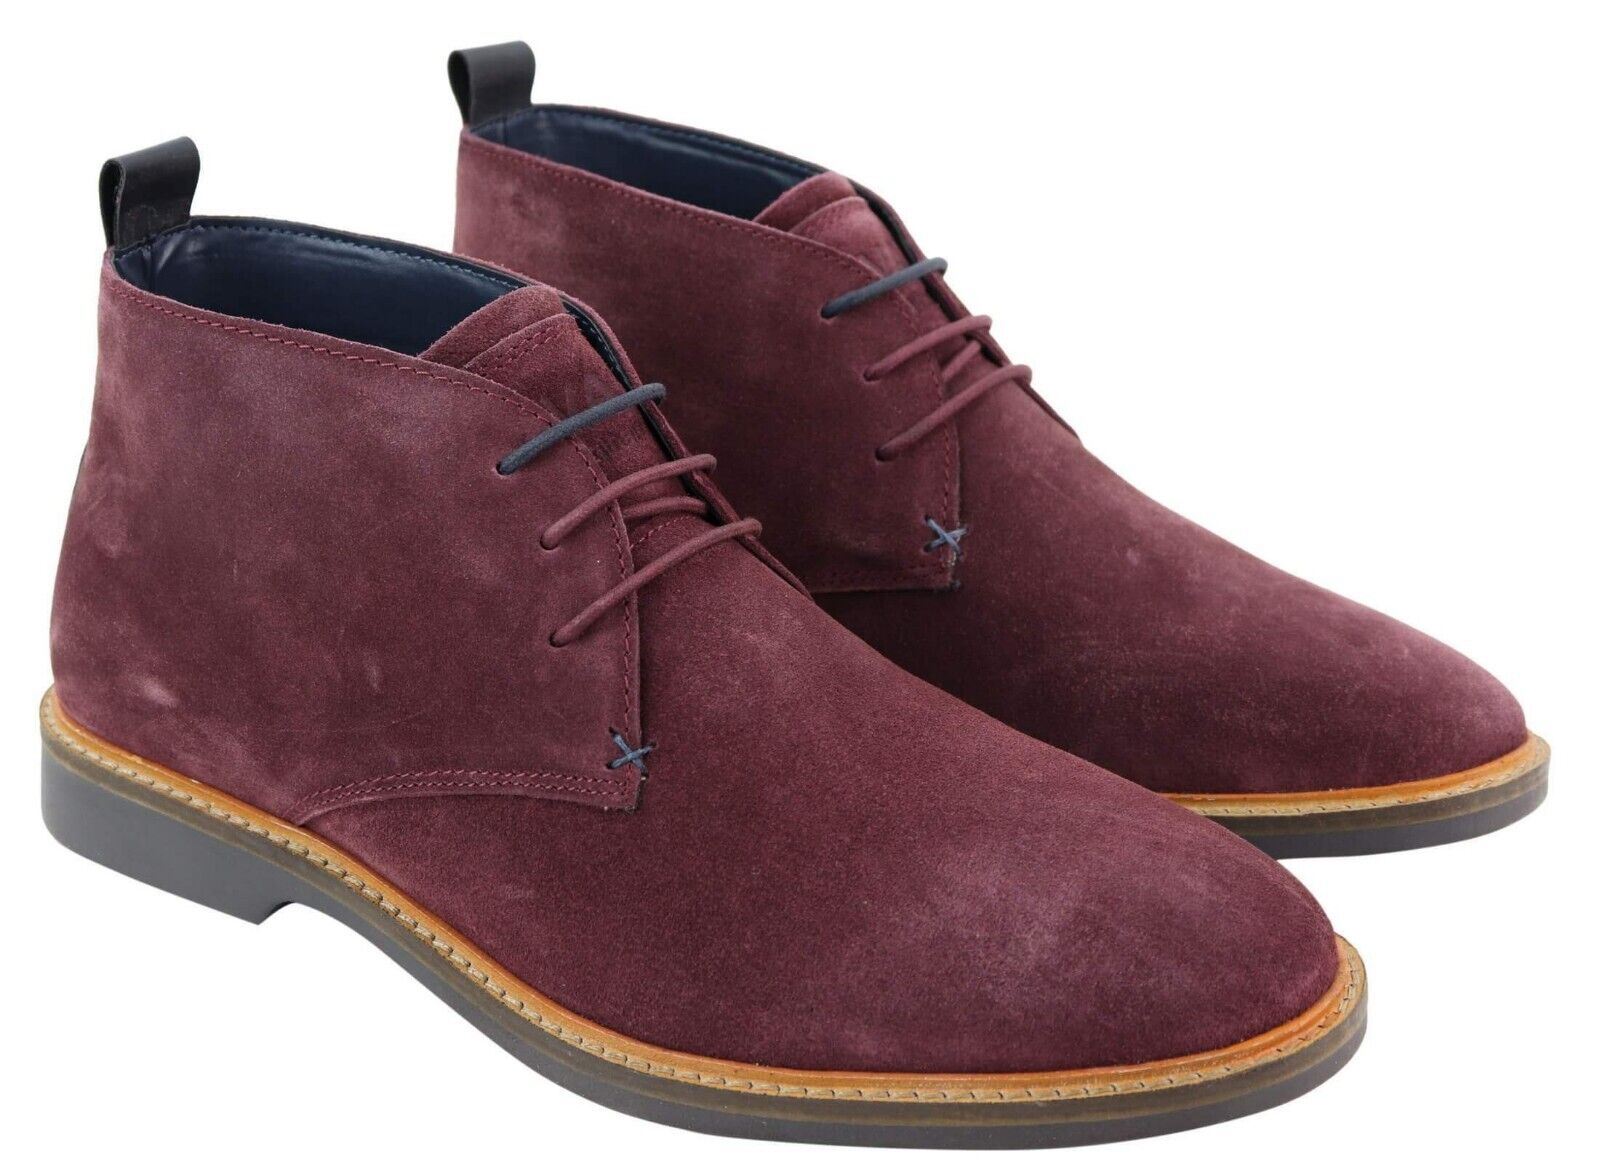 Mens Burgundy Suede Lace Up Chukka Boots